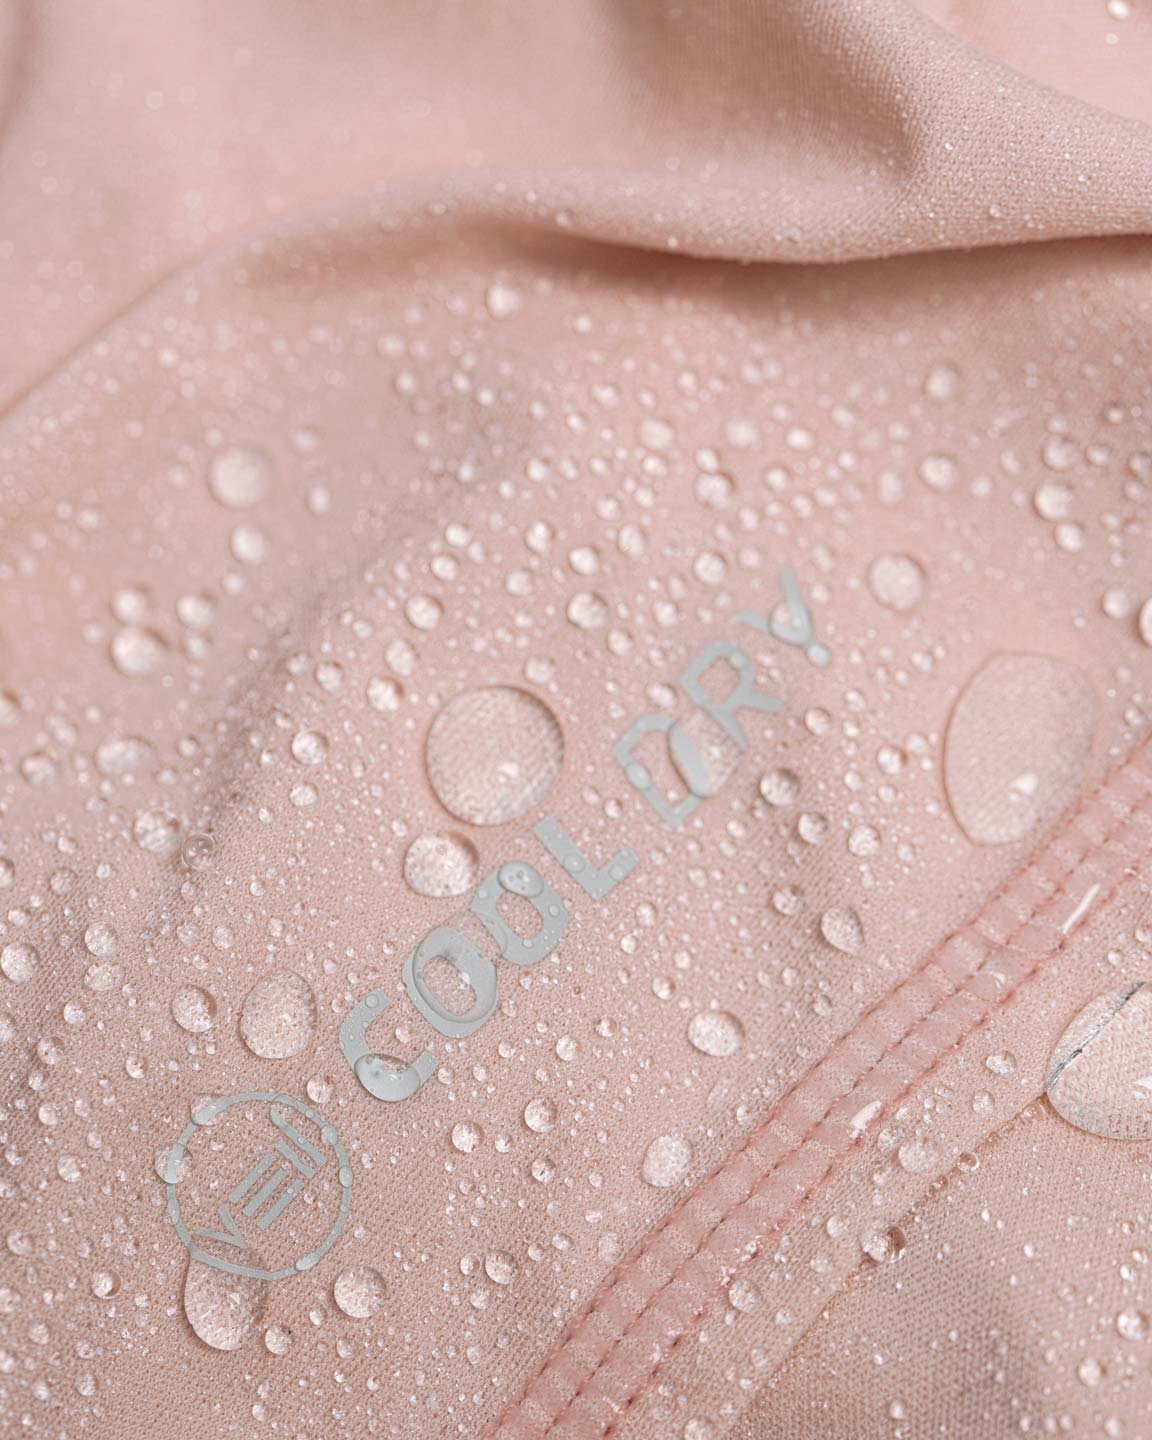 Cool Dry Shawl 2.0 in sepia rose by Veil Garments. Sports hijab collection.